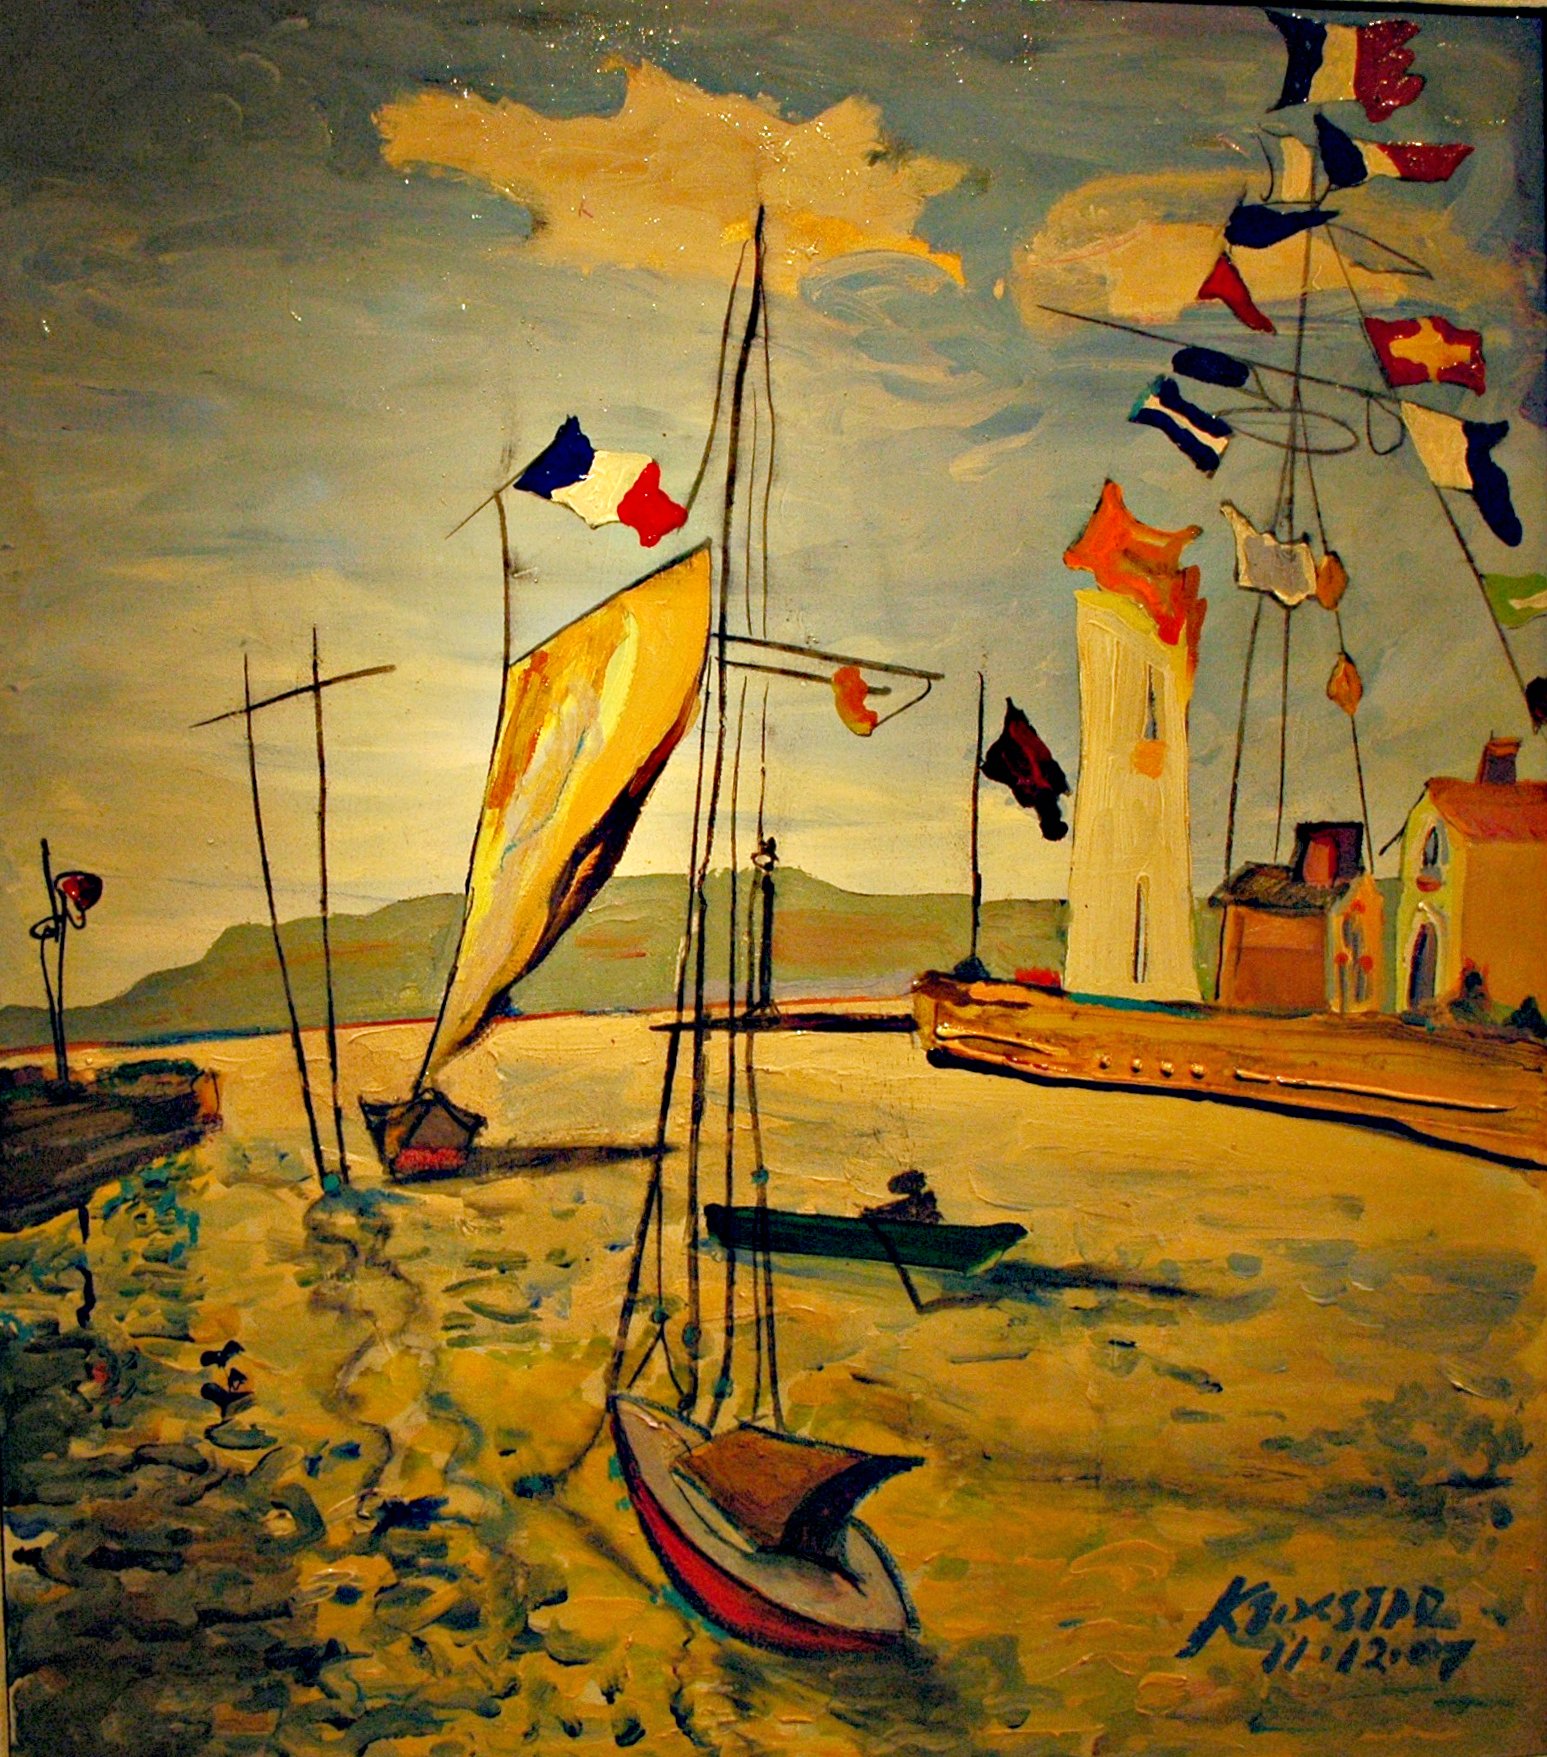 there is a painting with different sail boats